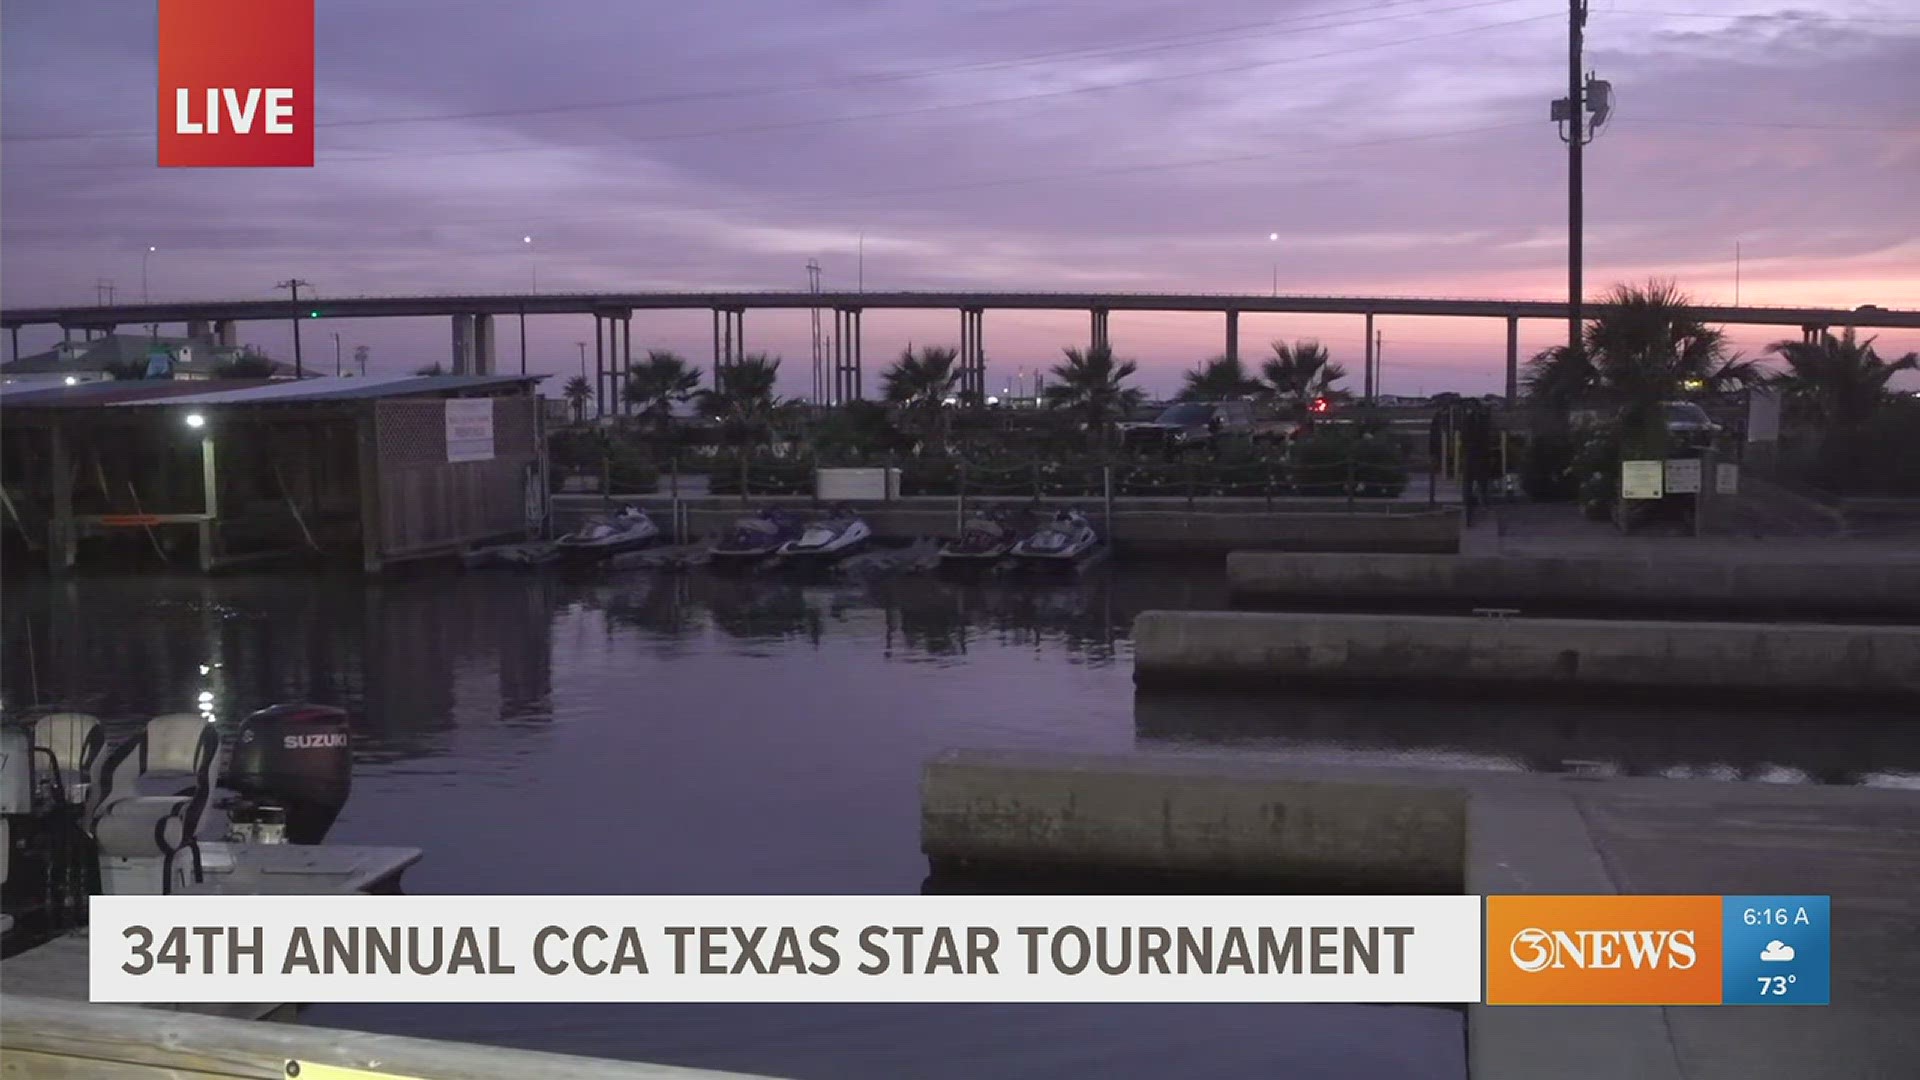 The tournament spans the entire Texas Gulf Coast and offers current CCA Texas members the chance to win over $1,000,000 in prizes and scholarships.